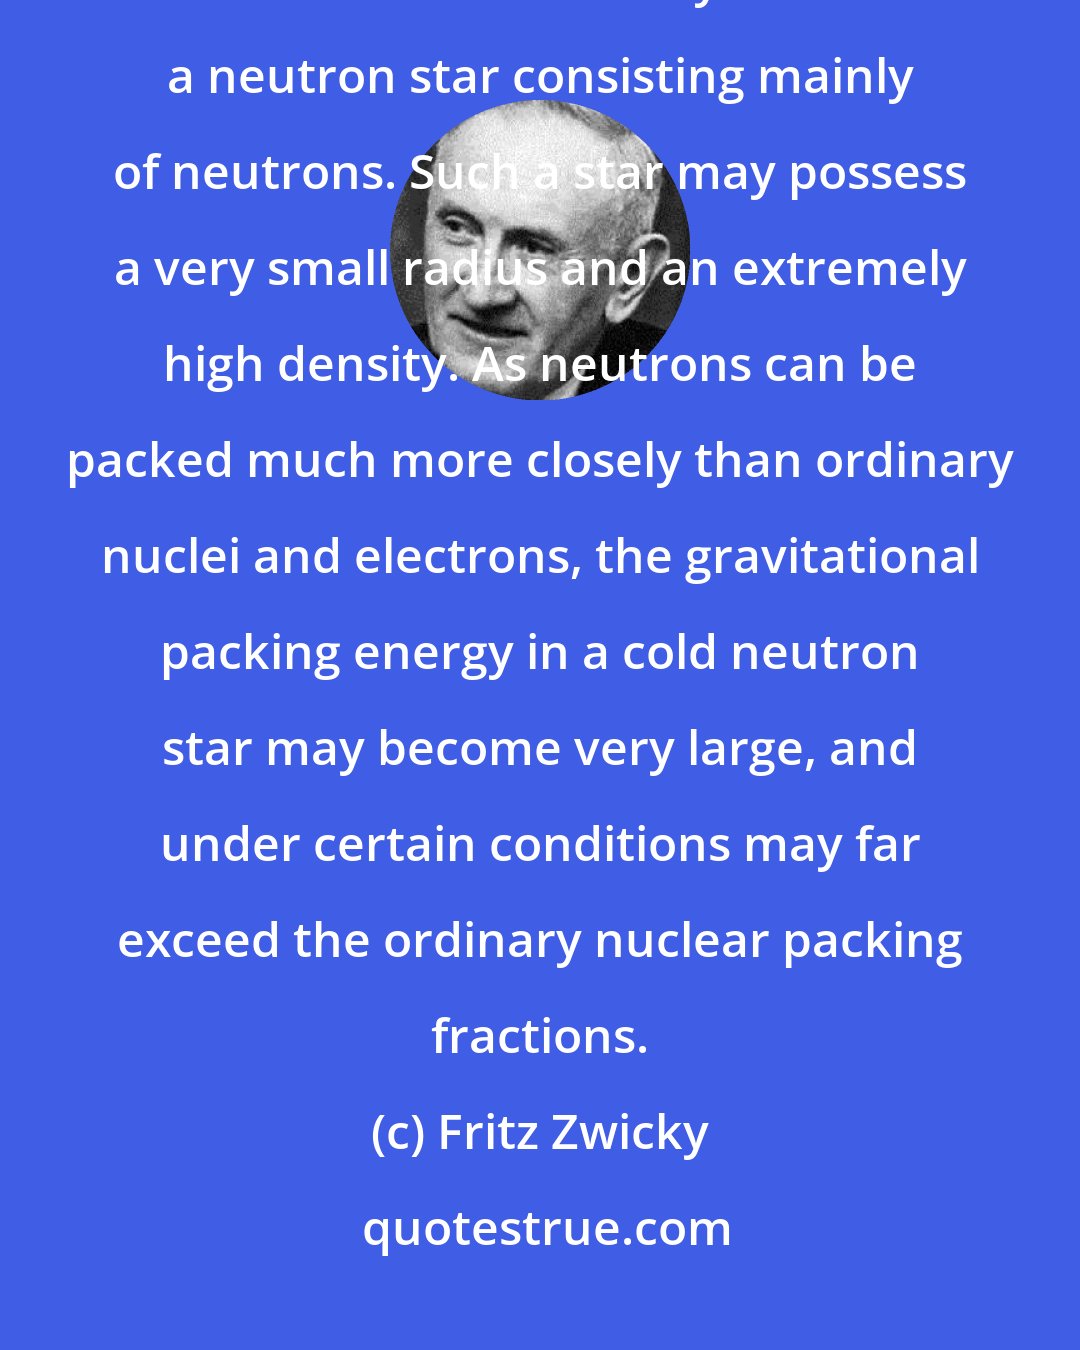 Fritz Zwicky: With all reserve we advance the view that a supernova represents the transition of an ordinary star into a neutron star consisting mainly of neutrons. Such a star may possess a very small radius and an extremely high density. As neutrons can be packed much more closely than ordinary nuclei and electrons, the gravitational packing energy in a cold neutron star may become very large, and under certain conditions may far exceed the ordinary nuclear packing fractions.